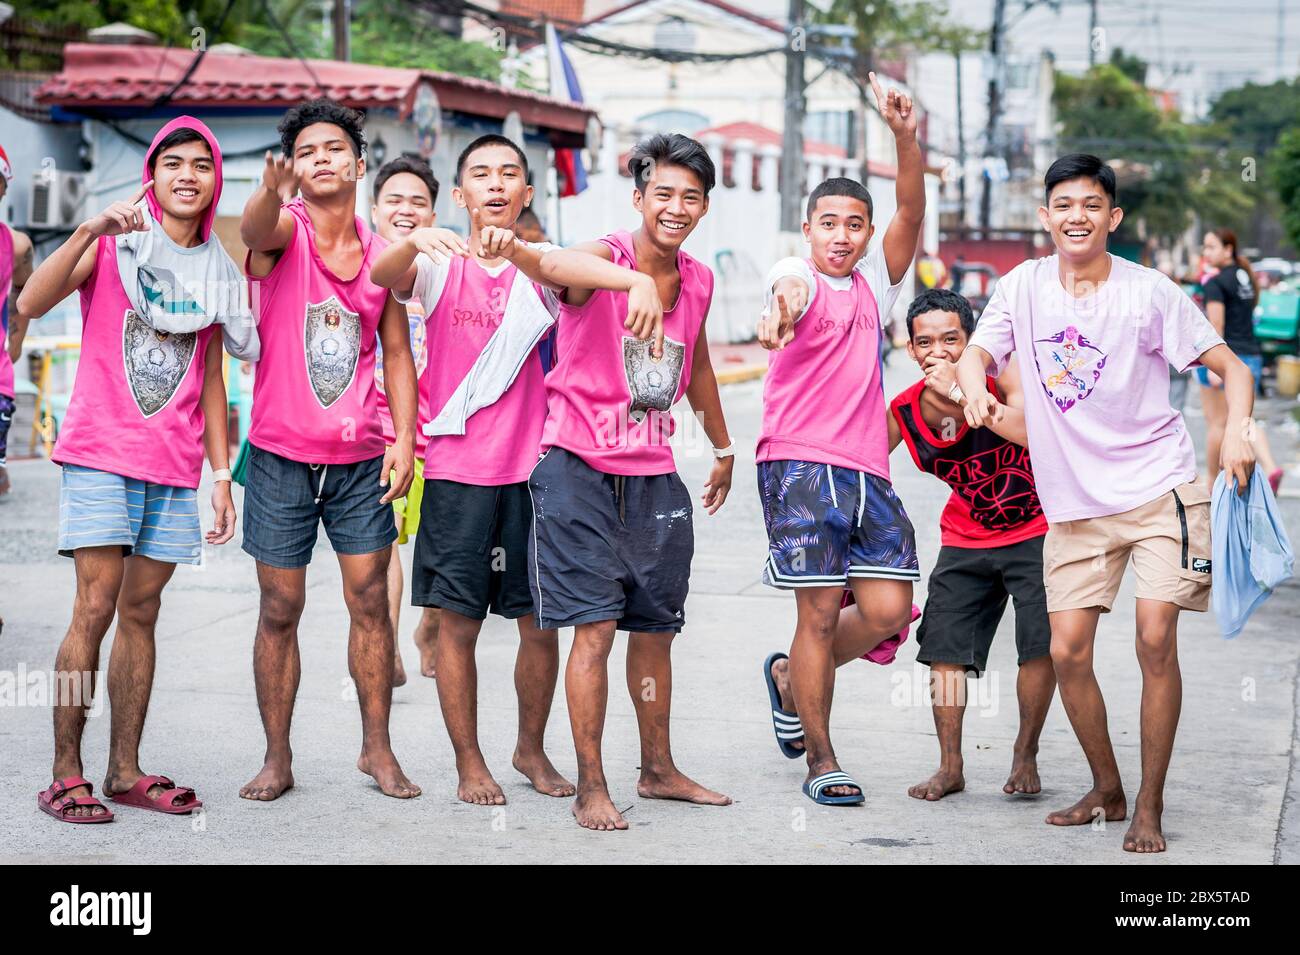 Young Filipino men joke around before heading out on the famous annual Black Nazarene Religious Parade in Manila The Philippines. Stock Photo